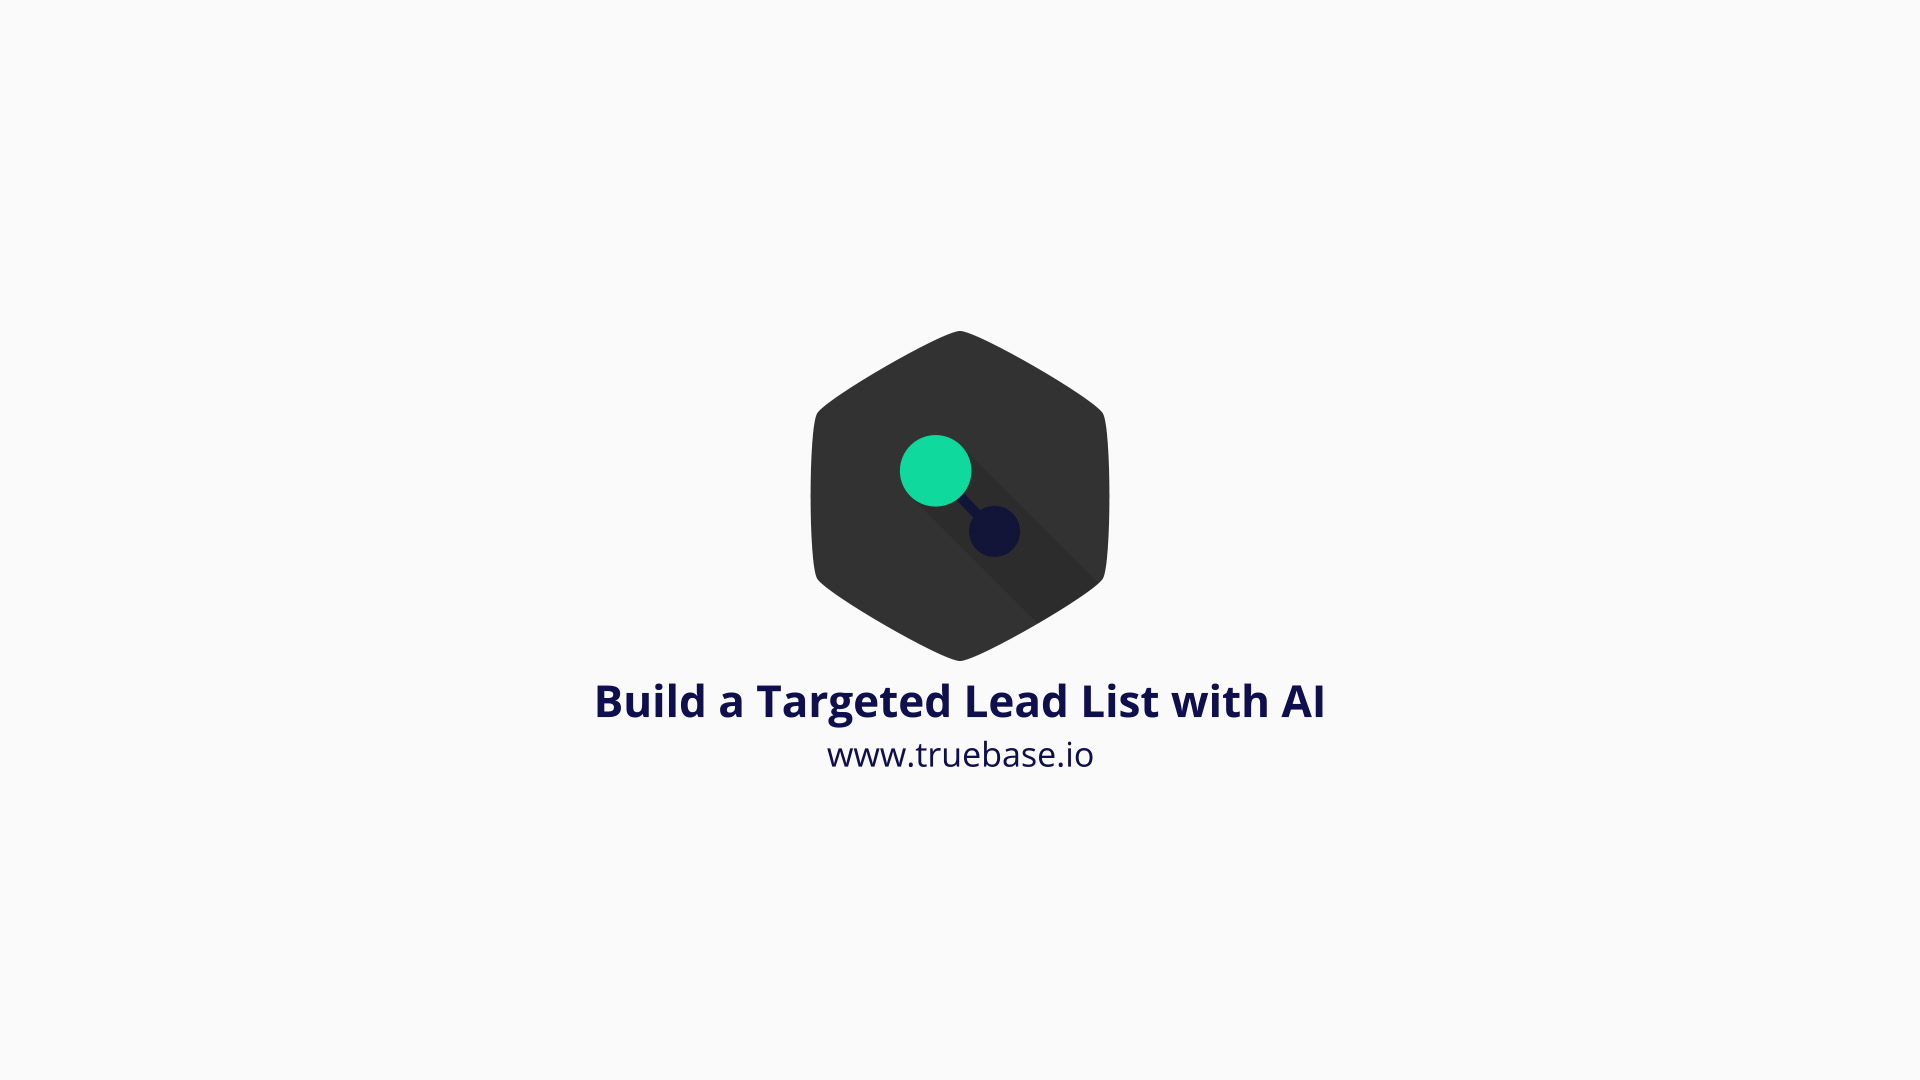 Build a Targeted Lead List with AI